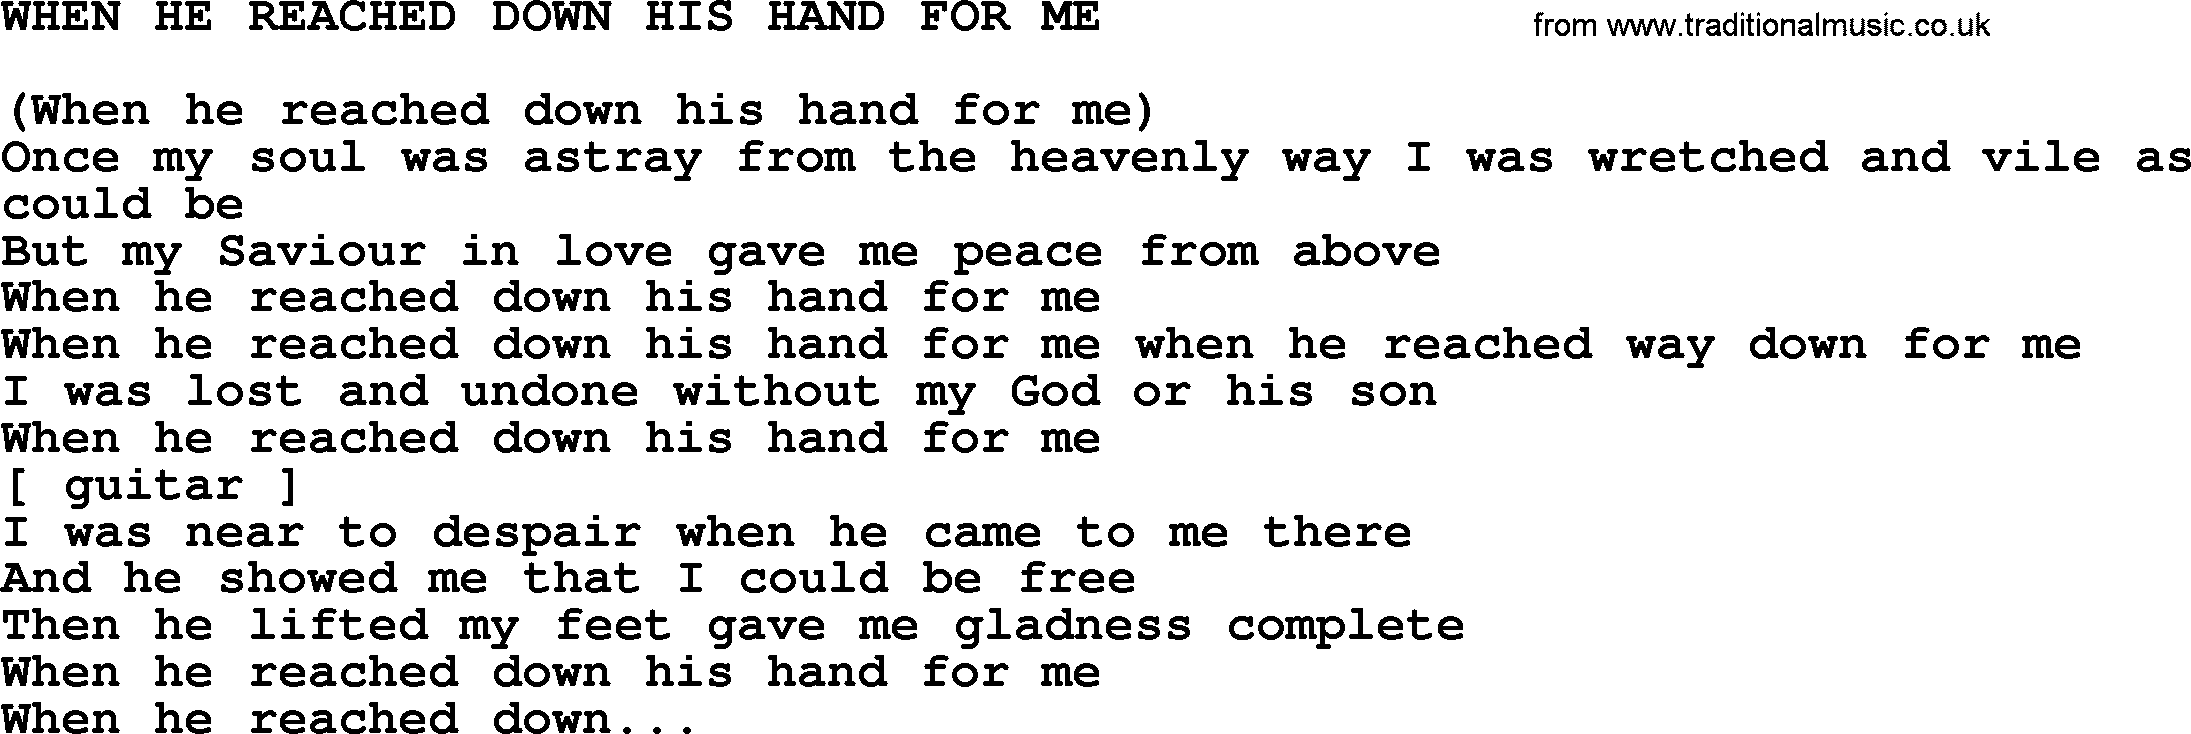 Johnny Cash song When He Reached Down His Hand For Me.txt lyrics